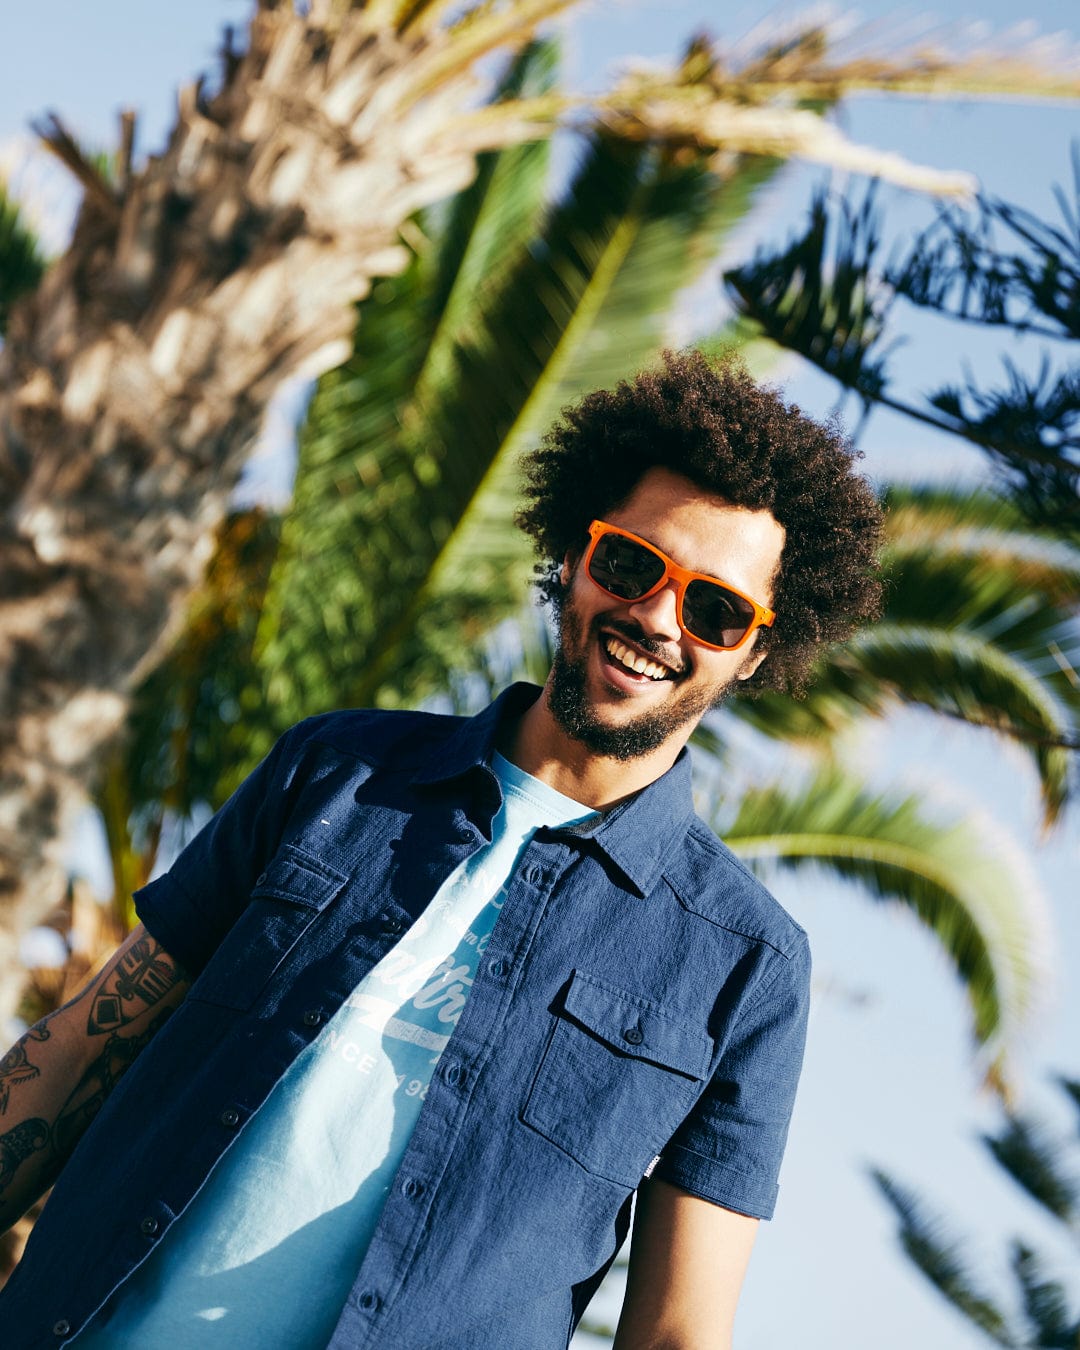 A young man with an afro wearing sunglasses and a Saltrock Polperro - Mens Short Sleeve Shirt - Blue smiles in a sunny setting with a palm tree in the background.